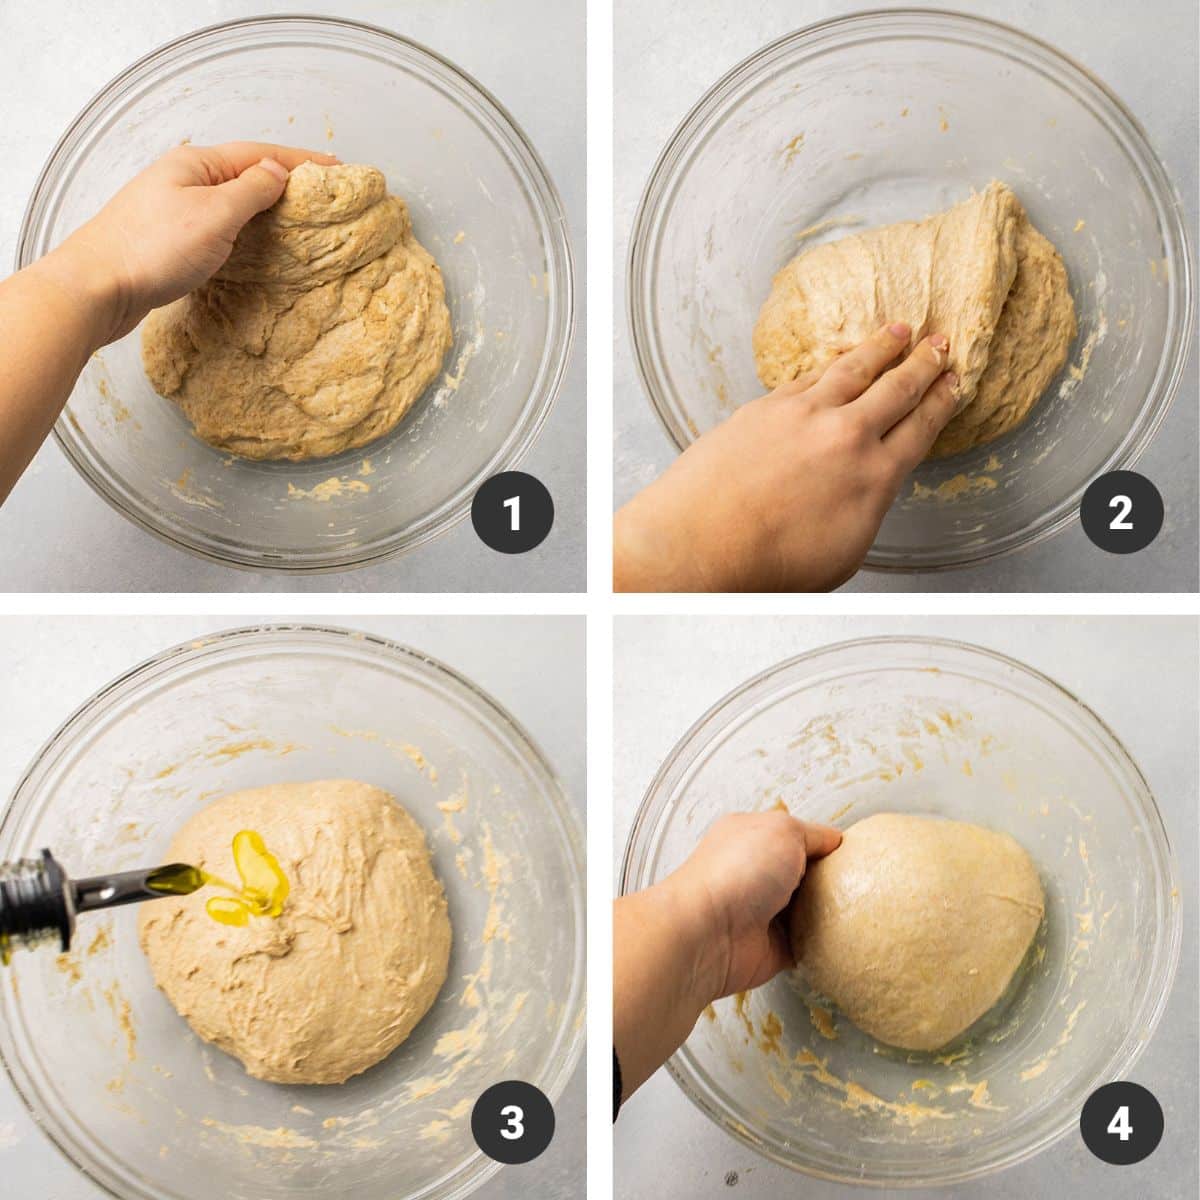 Hands folding wheat pizza dough over on itself.